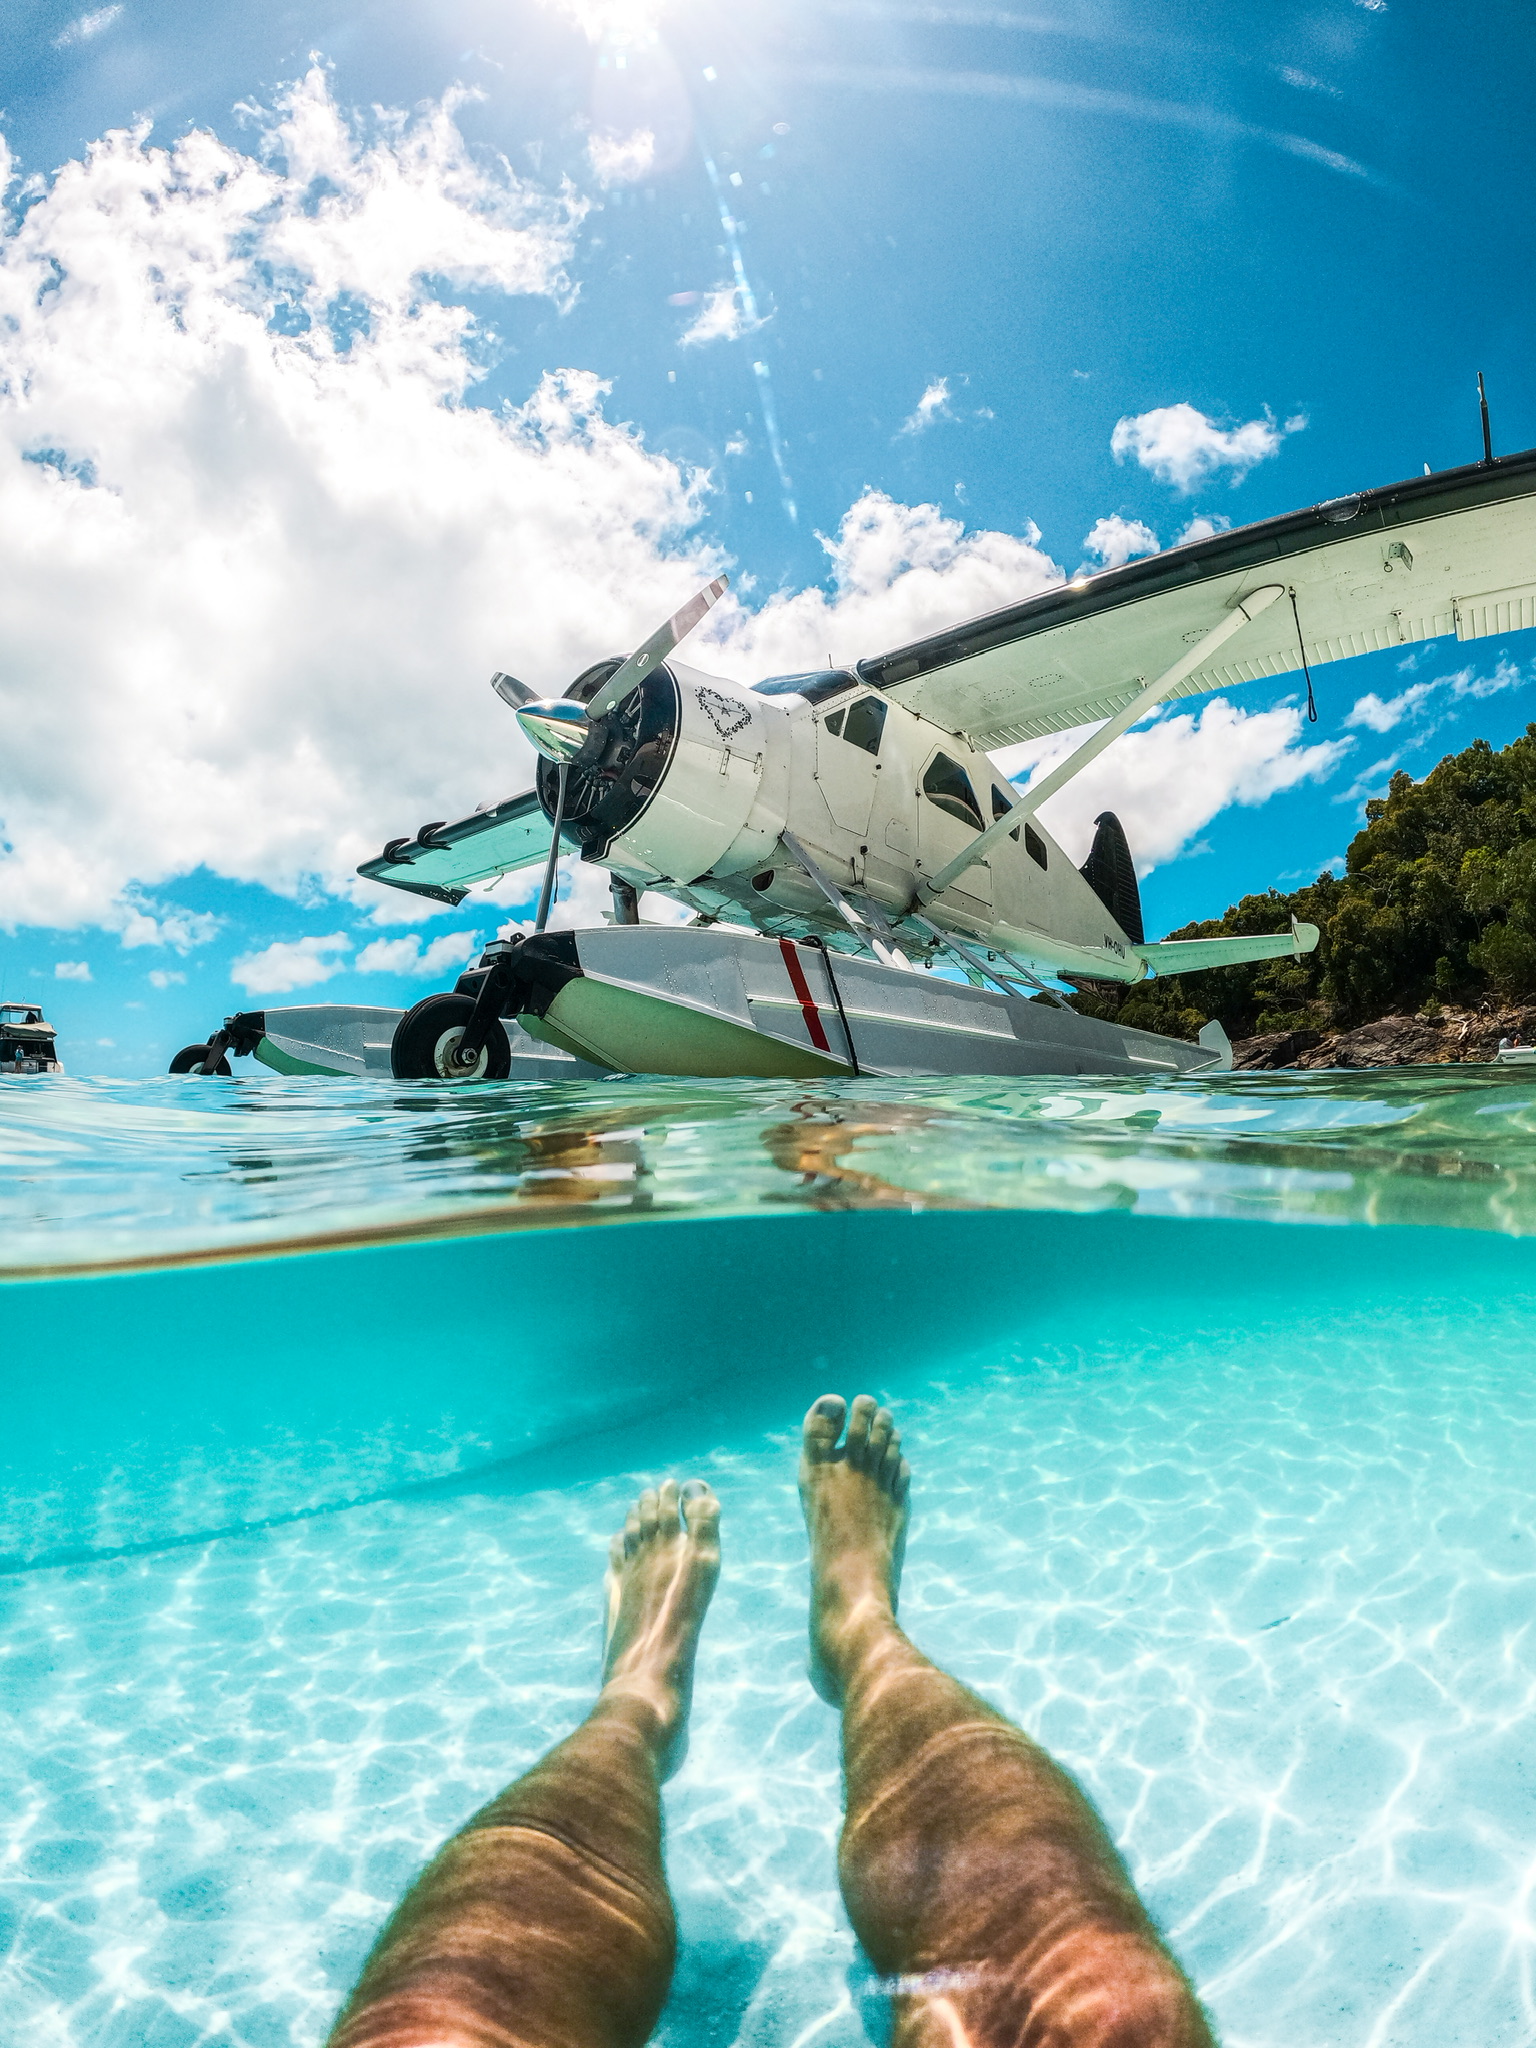 Photo by Izzy J Ryan. Kicking back at Whitehaven beach with our Dehavilland Beaver.